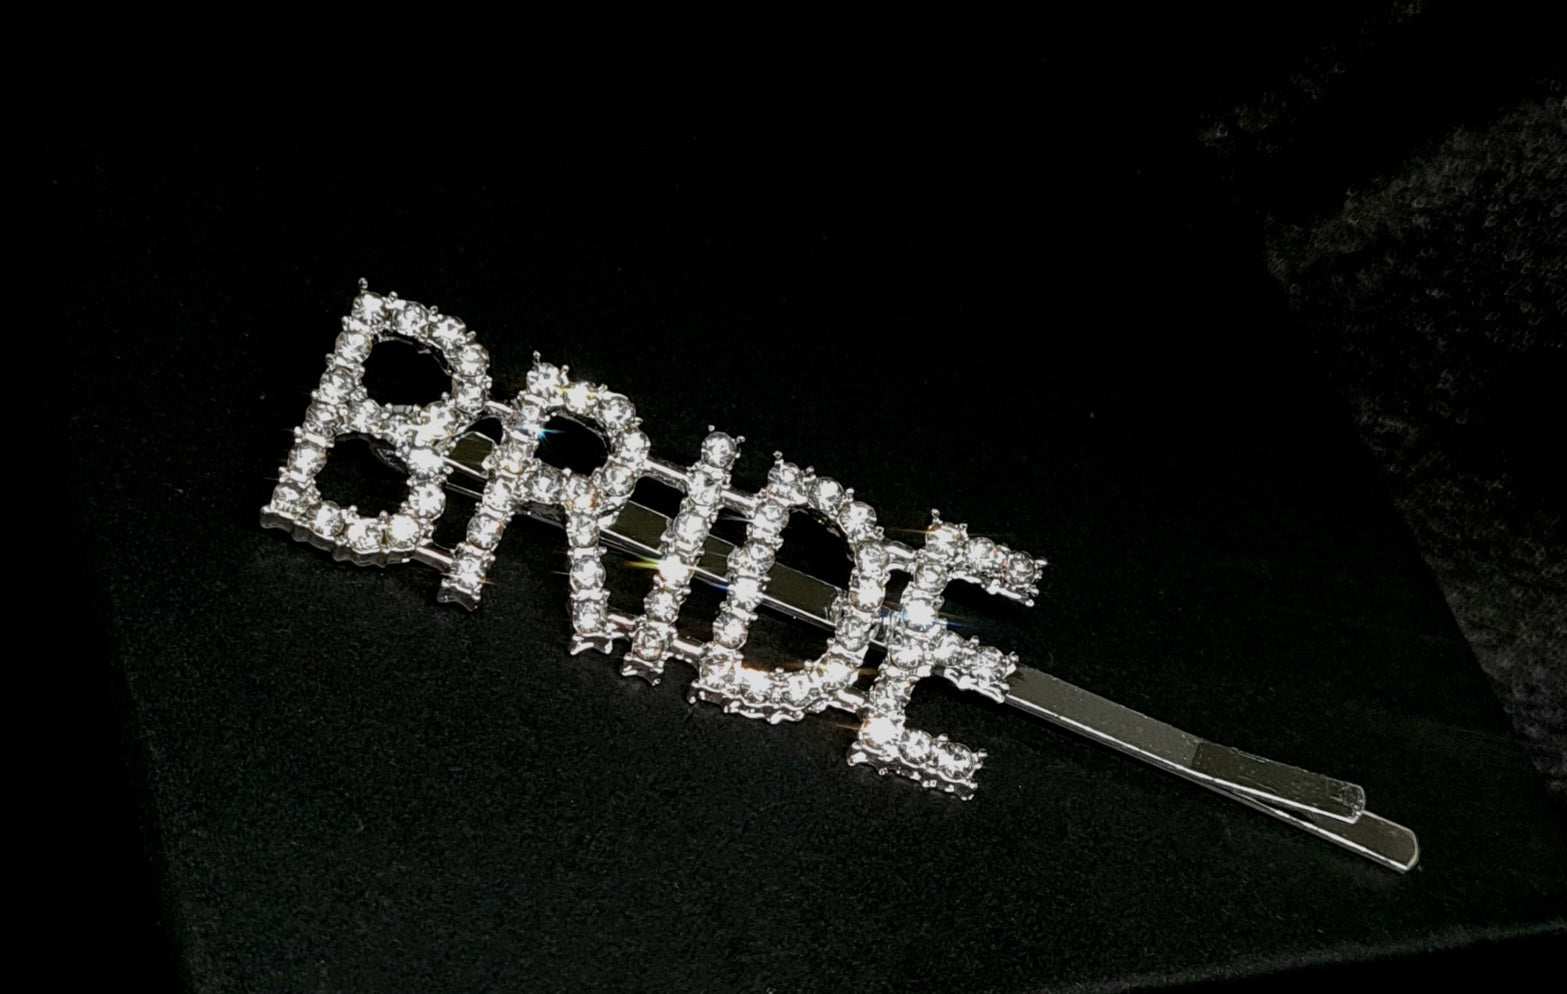 Bride Pin an elegant accessory crafted in silver with radiant crystal accents and cubic zirconia stones.